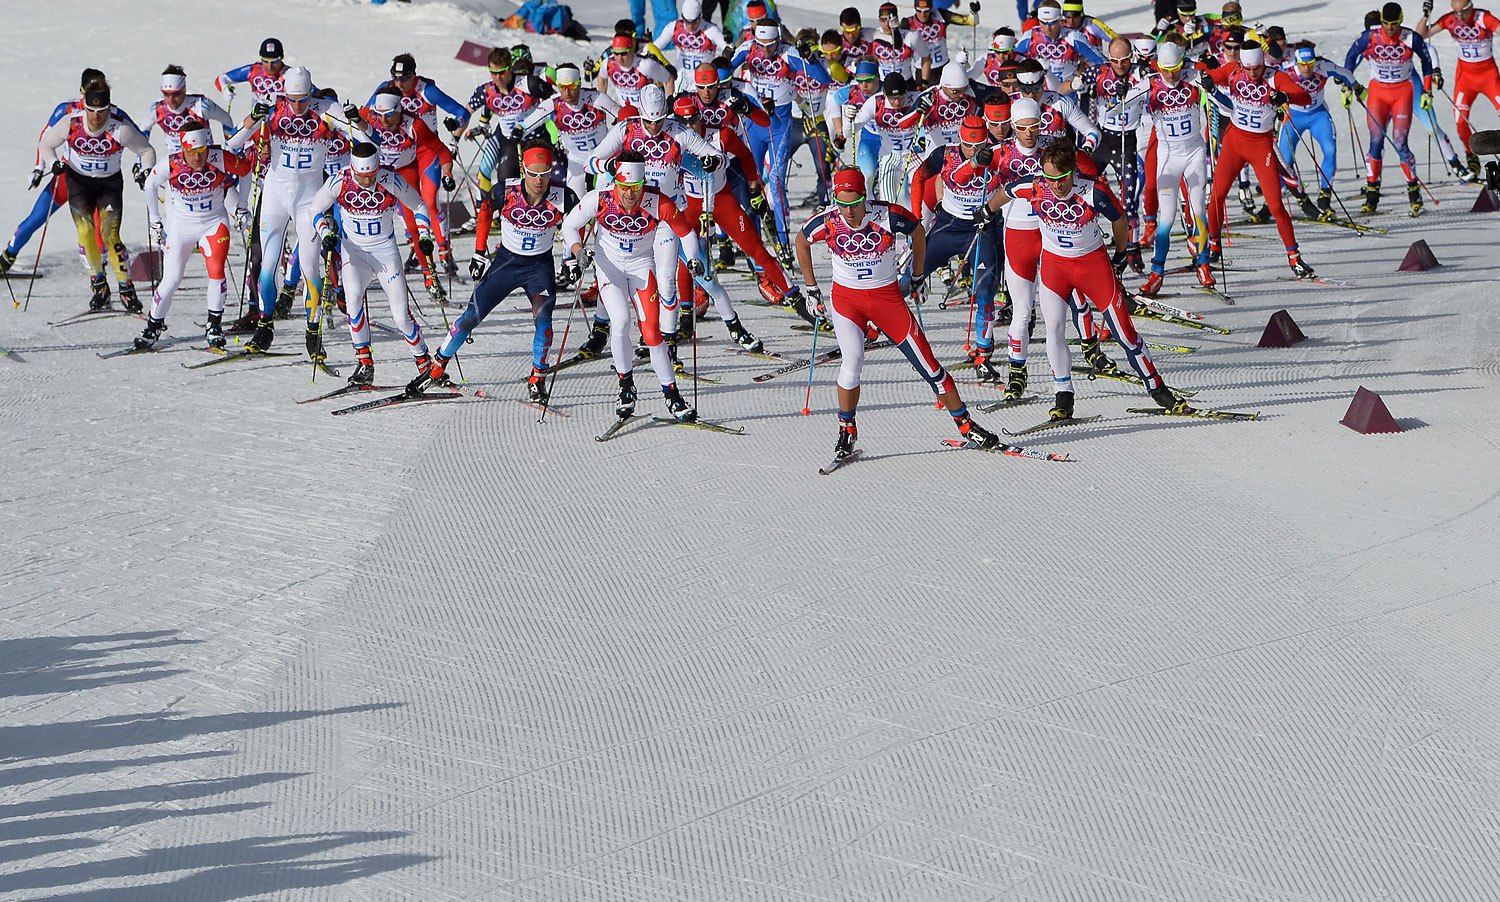 Norway's Chris Andre Jespersen leads the pack after the start of the Men's Cross-Country Skiing 50km Mass Start Free